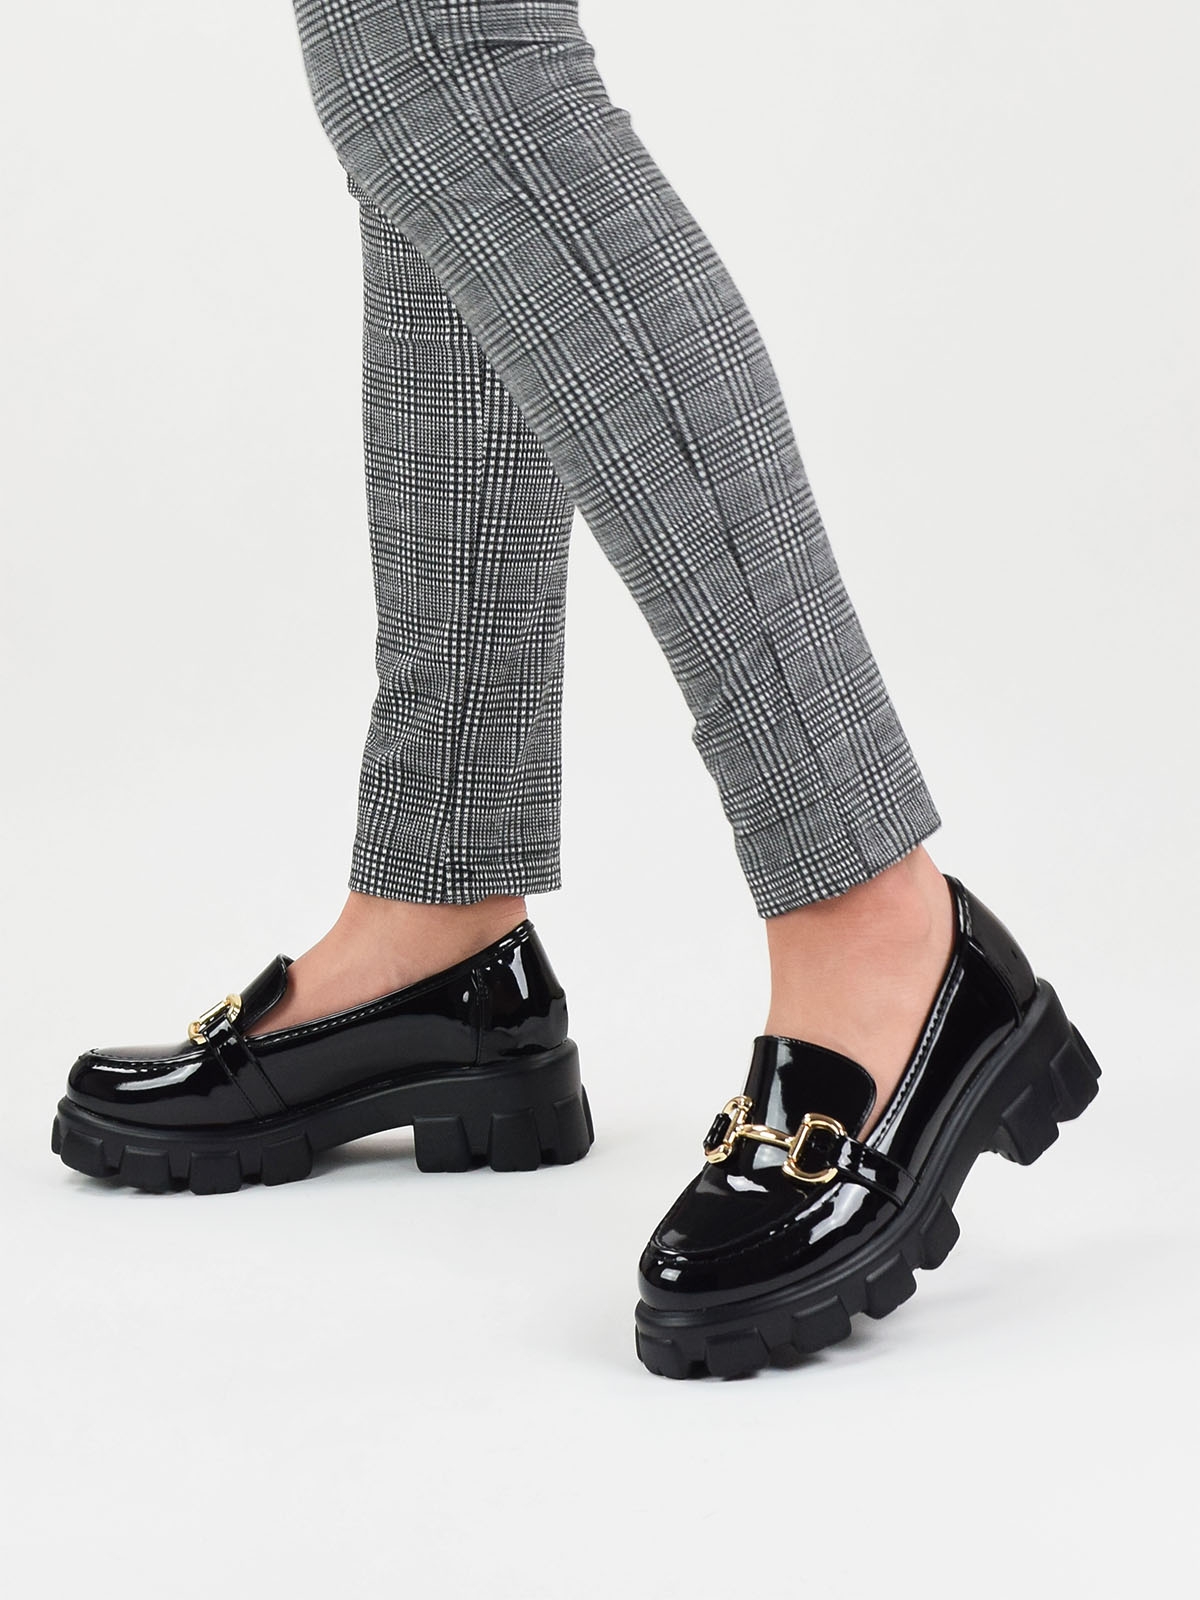 Chunky loafers with gold trim in black patent